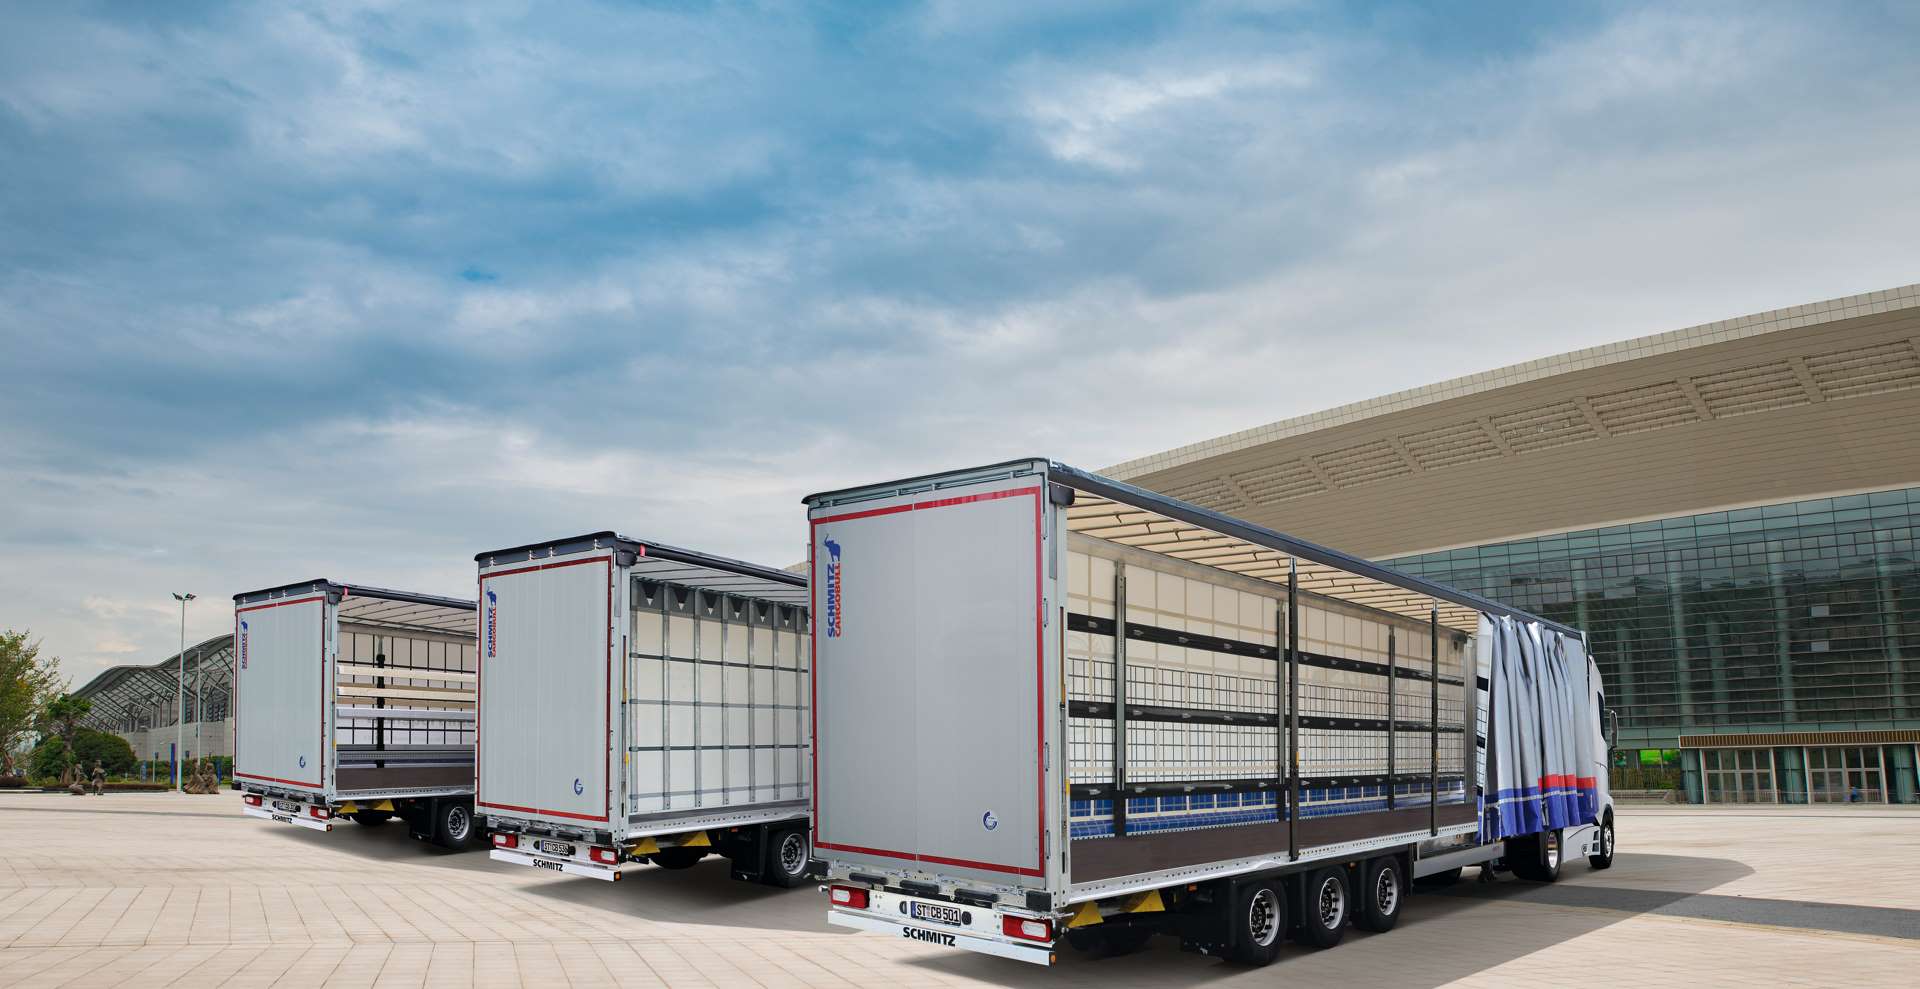 Different bodies of S.CS curtainsider semi-trailers